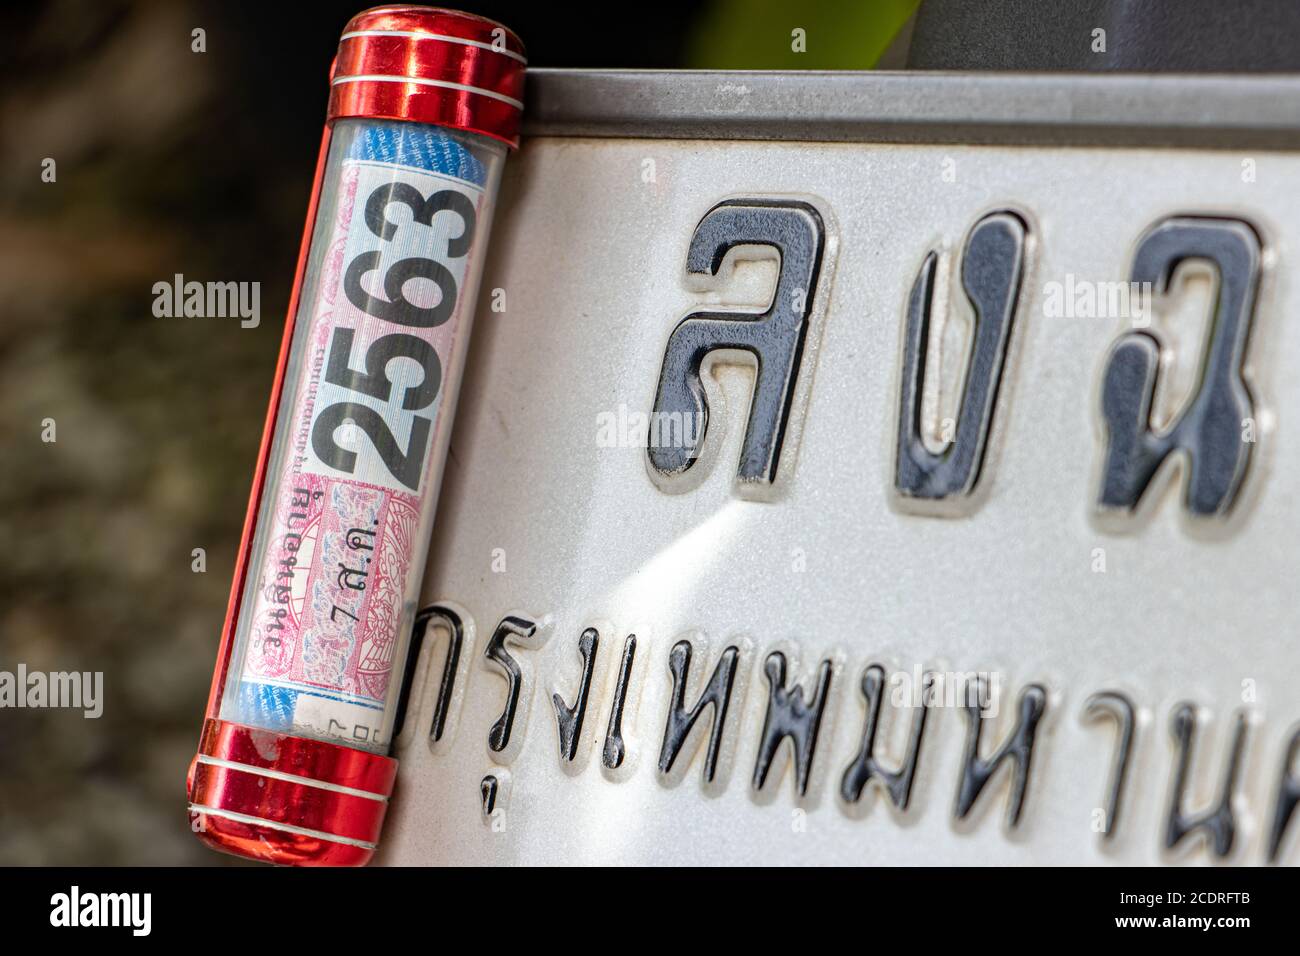 SAMUT PRAKAN, THAILAND, JUN 23 2020, Confirmation of the insurance in the steel box attached to the registration plate of the vehicle - motorcycle. Stock Photo